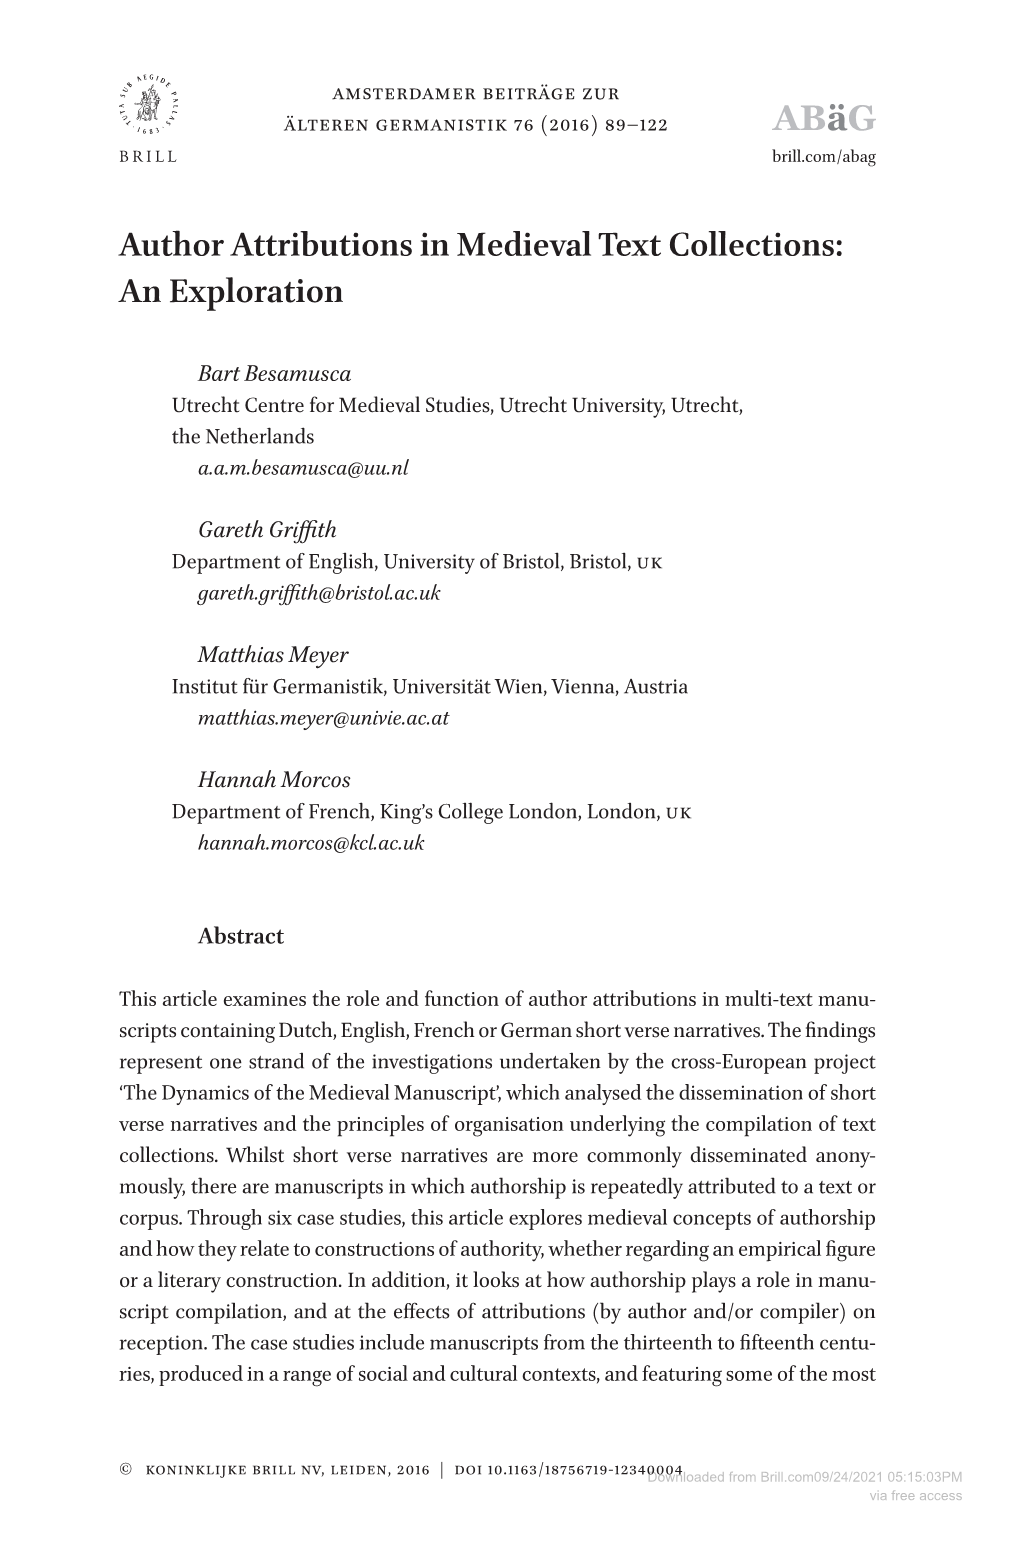 Author Attributions in Medieval Text Collections: an Exploration